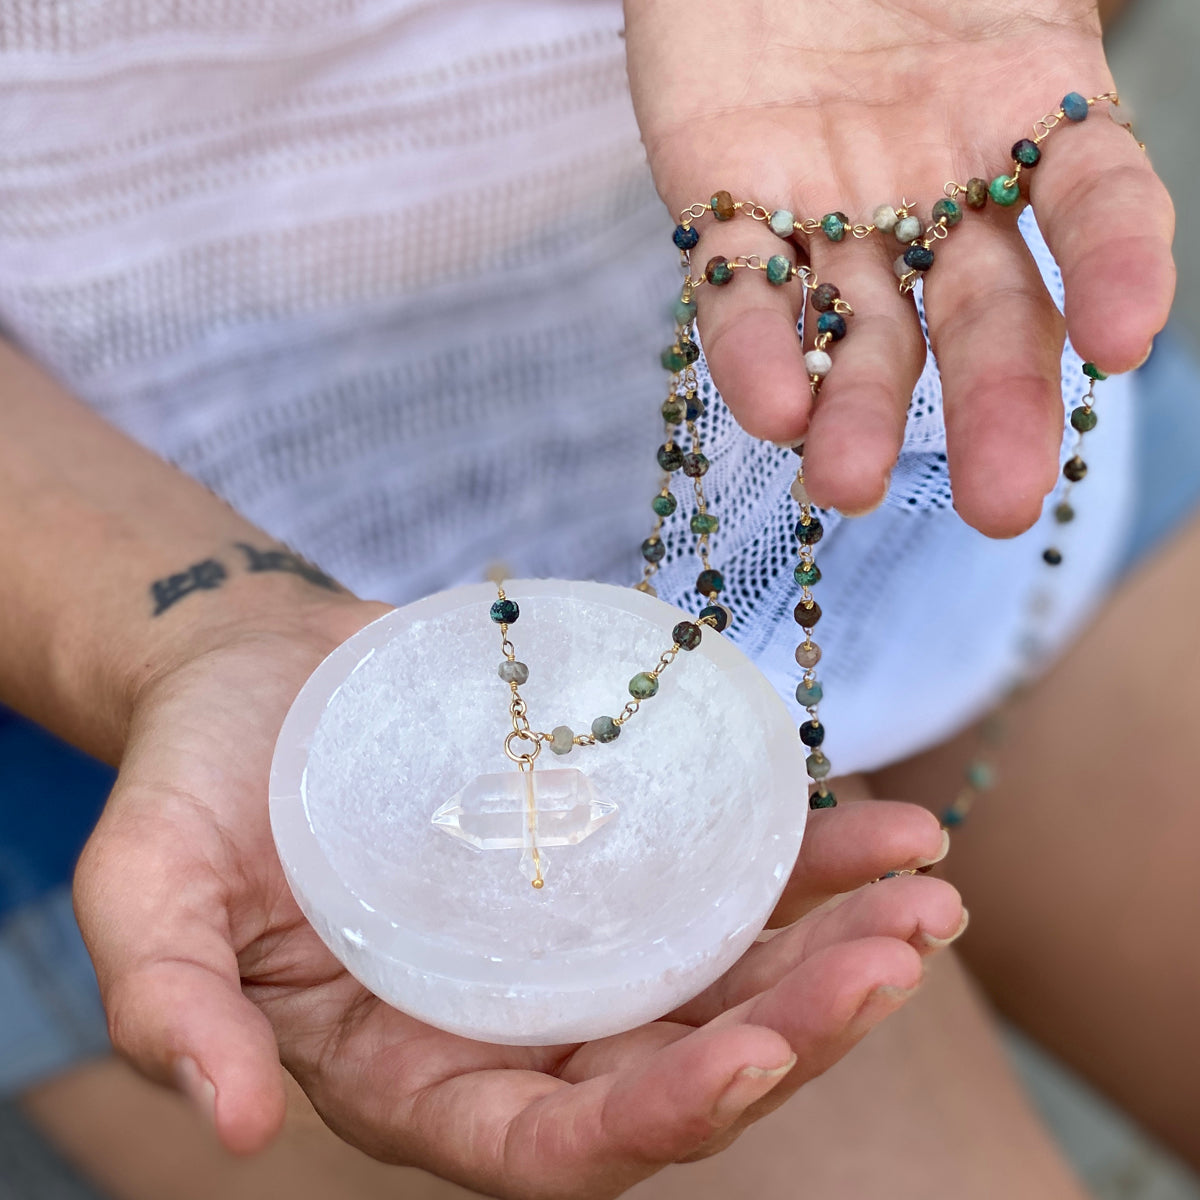  These selenite bowls are perfect for charging your intentional jewelry and crystals.   Selenite Bowl for Crystal Cleansing and Charging, Selenite Charging Dish - Selenite Bowl for jewelry, Crystal Cleansing, Energy Cleansing, Ring Dish, White Selenite, Selenite raw, selenite bowl, Selenite Charging Dish.